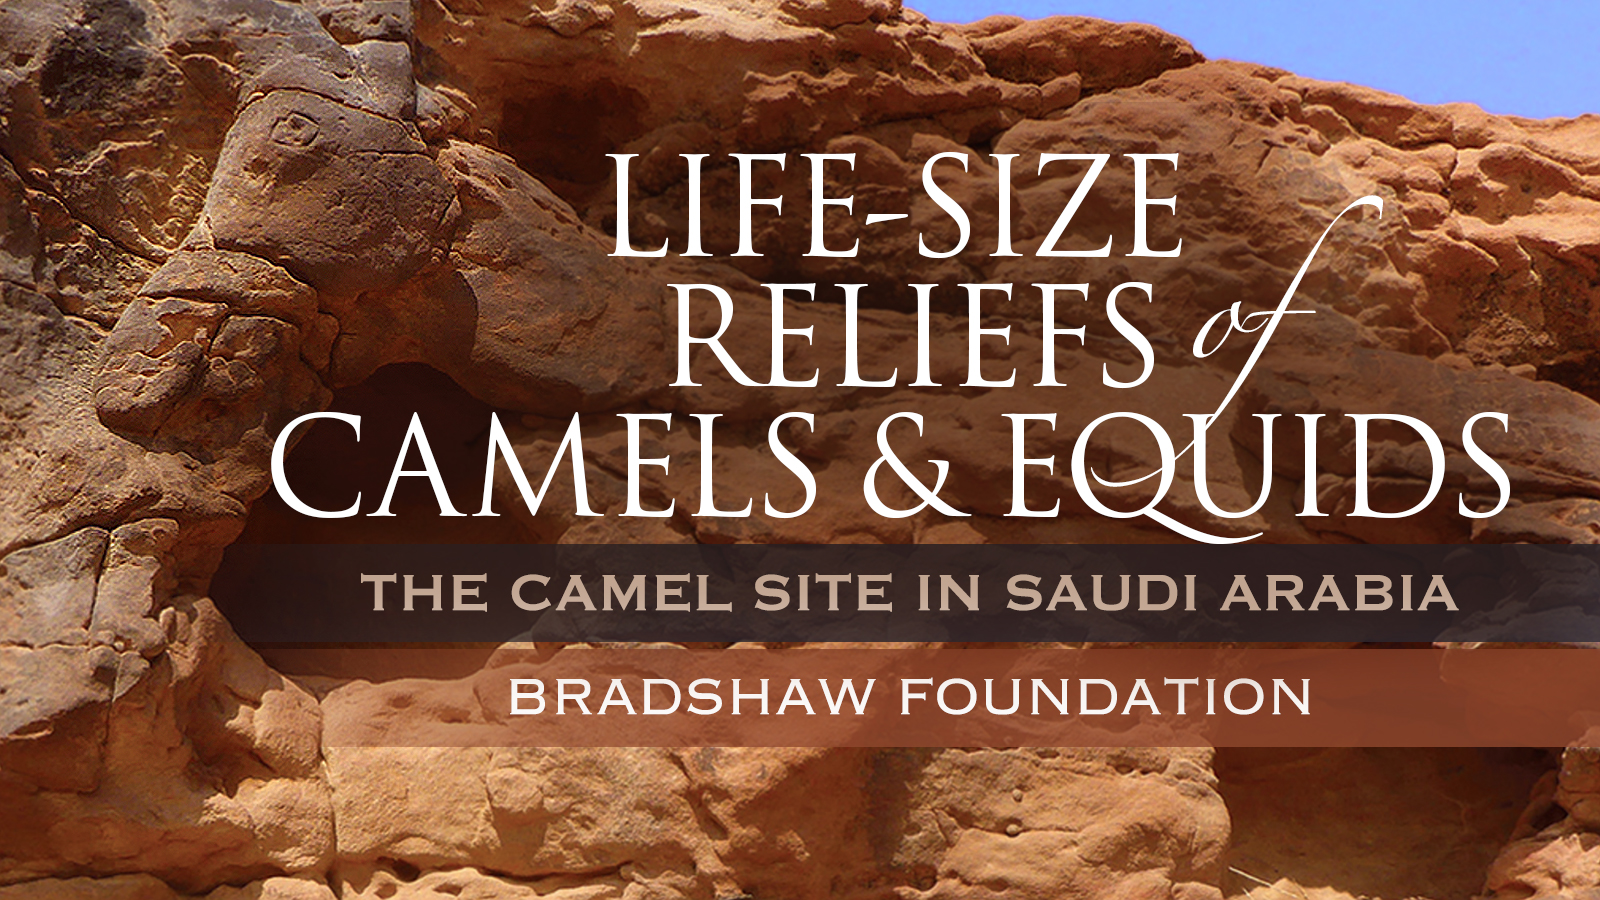 Life-sized reliefs of camels and equids: The Camel Site in Saudi Arabia